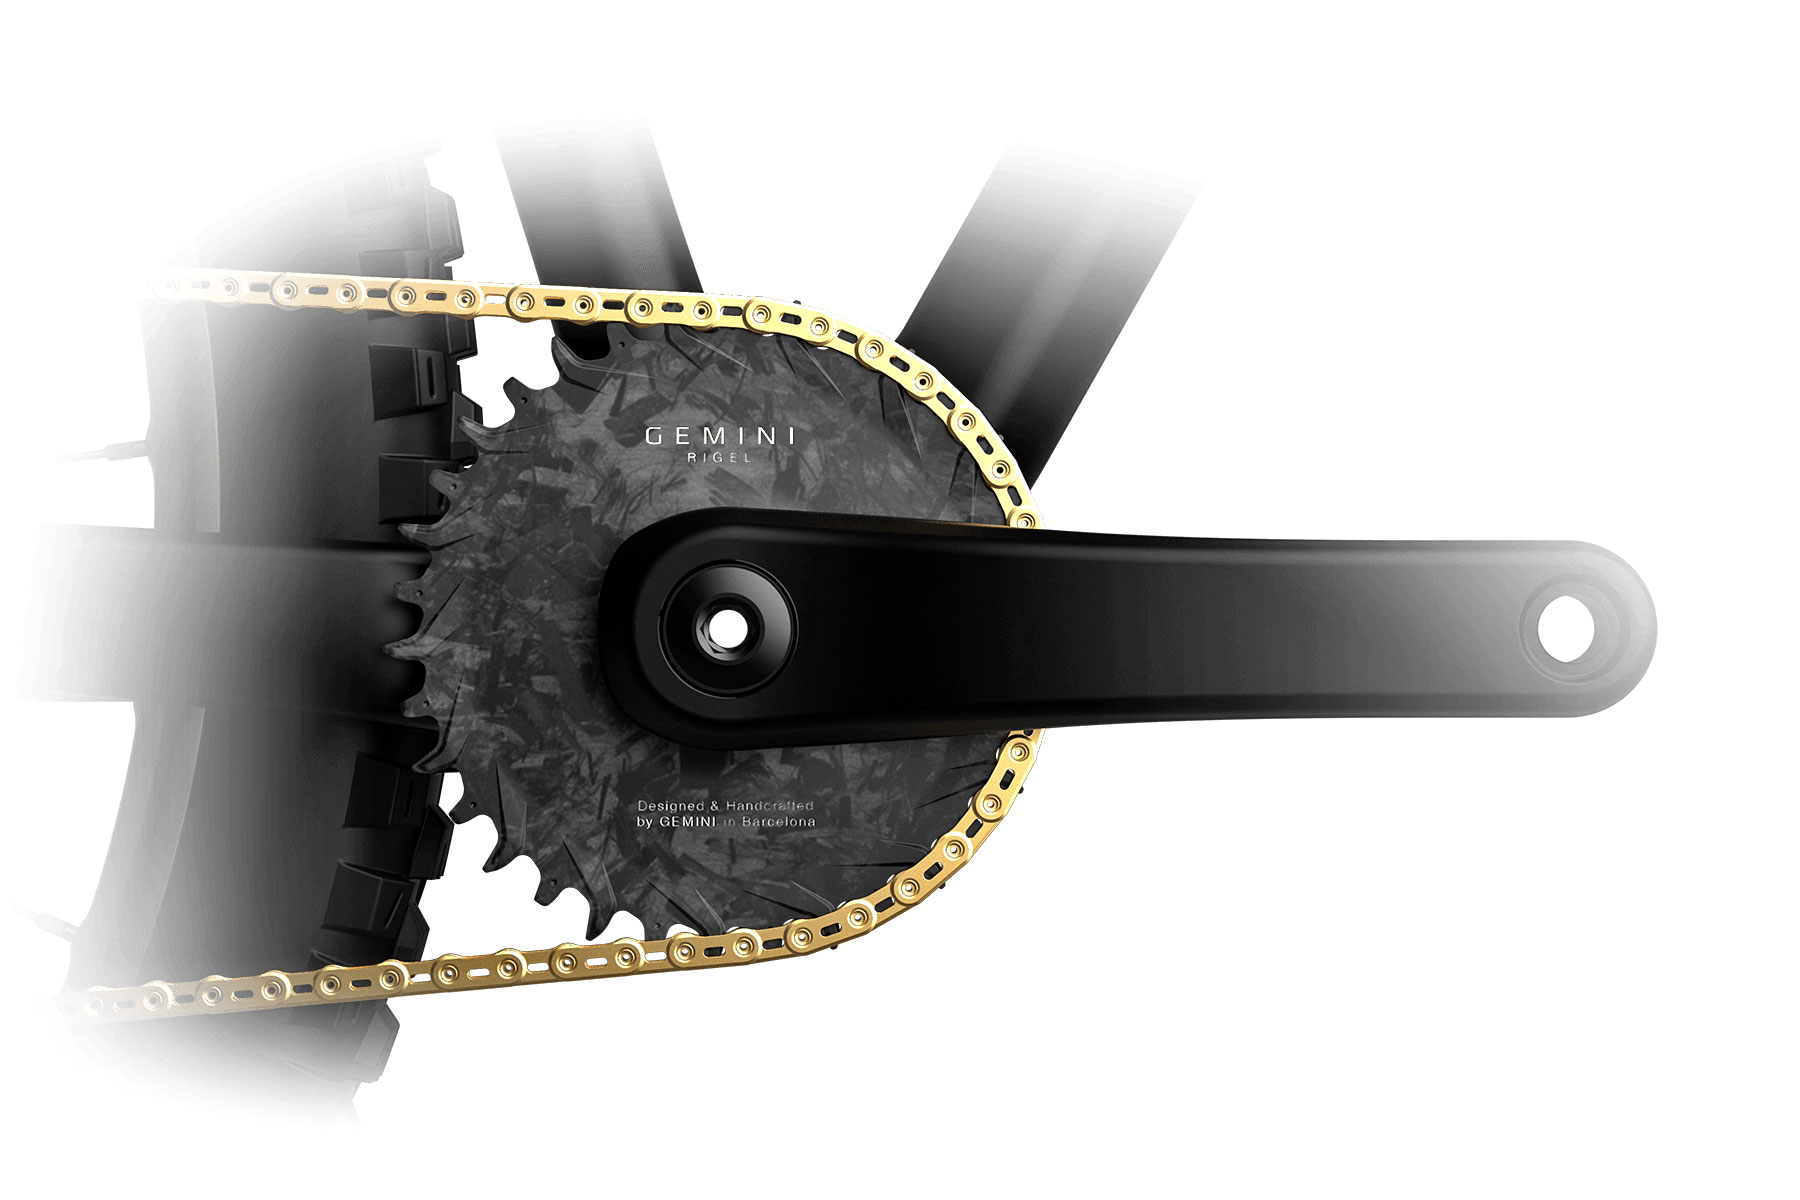 Gemini Rigel ultralight compression molded forged carbon 1x direct mount bike chainrings, rendering on crankset